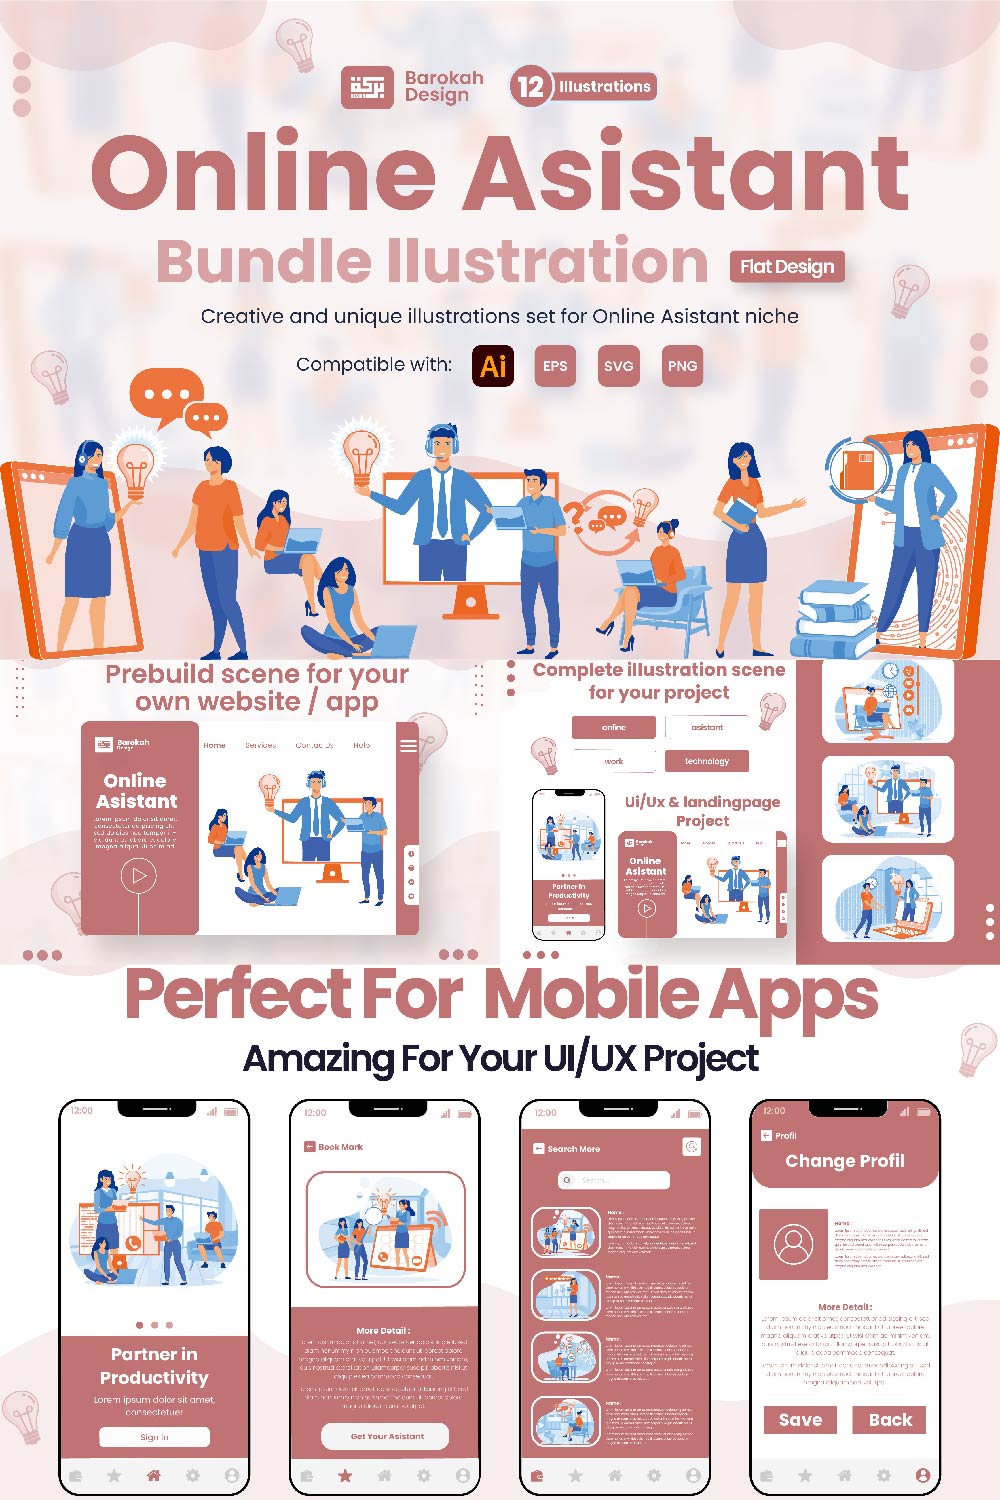 12 Illustrations Related to Online Assistant 2 pinterest preview image.